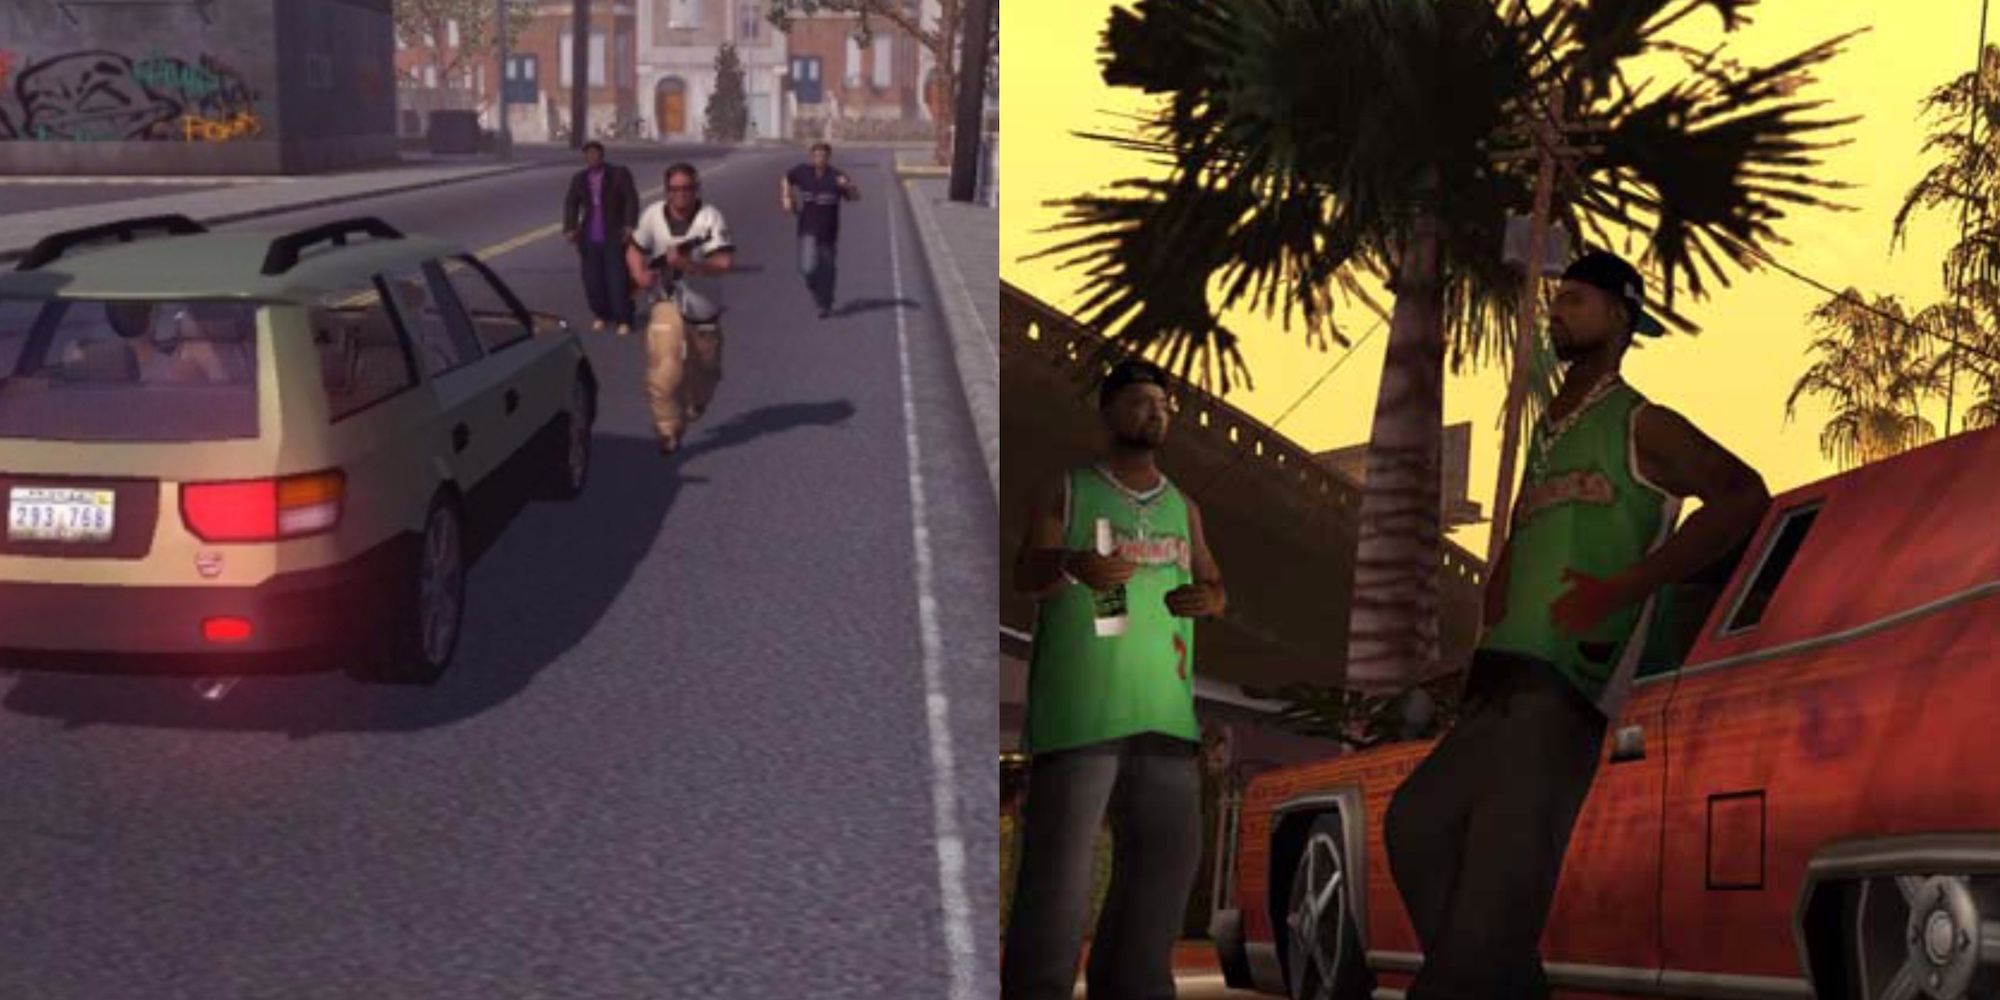 Saints Row On the left, San Andreas on the right